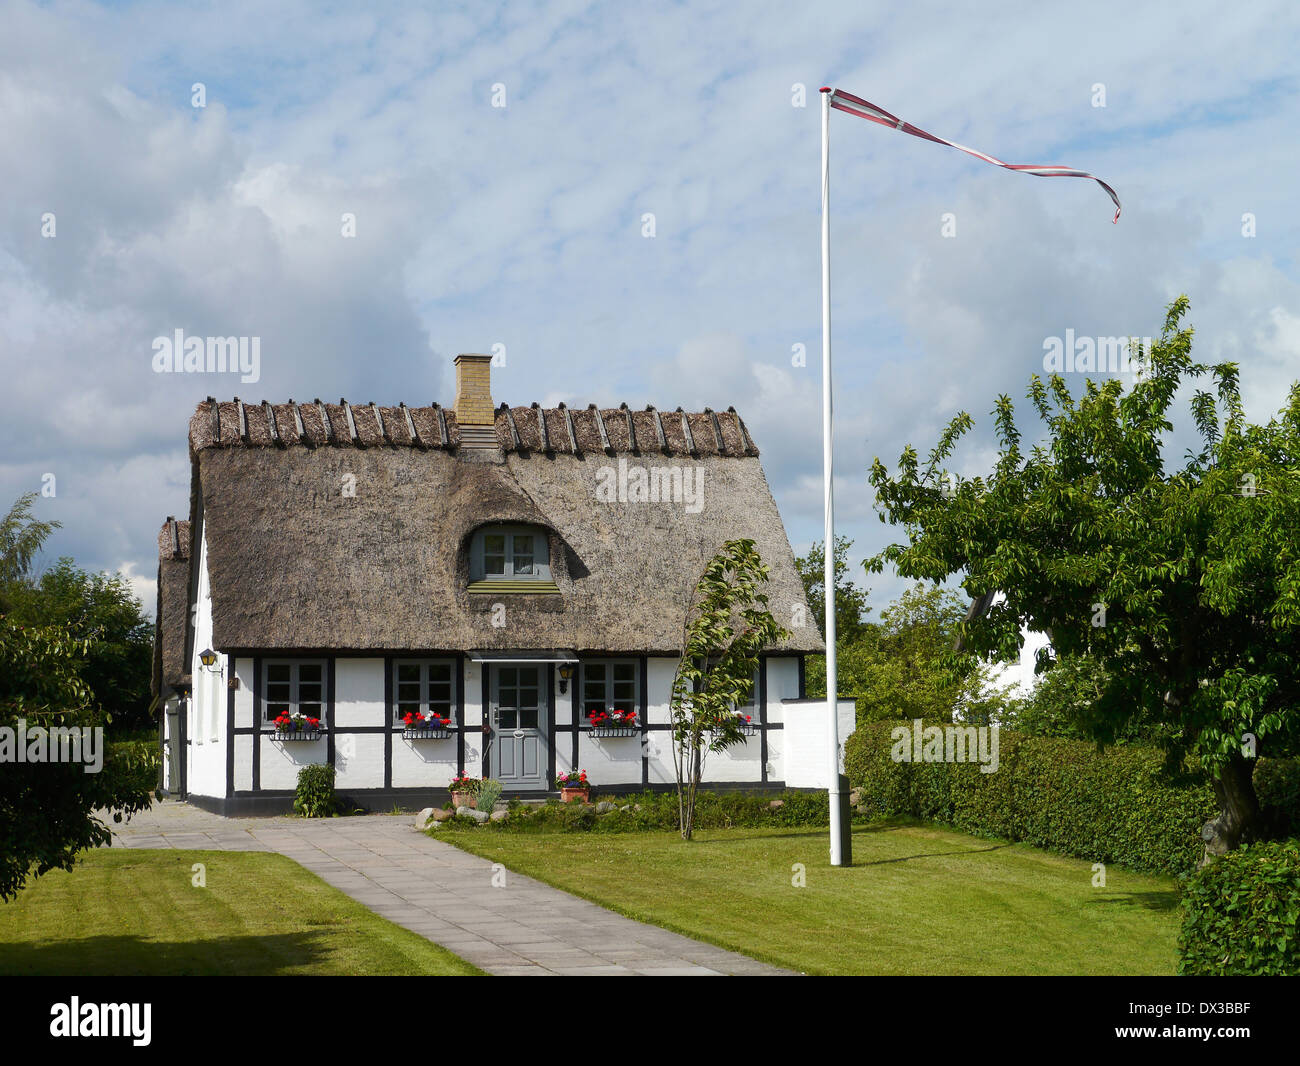 Thratched Haus am Gedesby, Falster, Ostsee, Dänemark Stockfoto